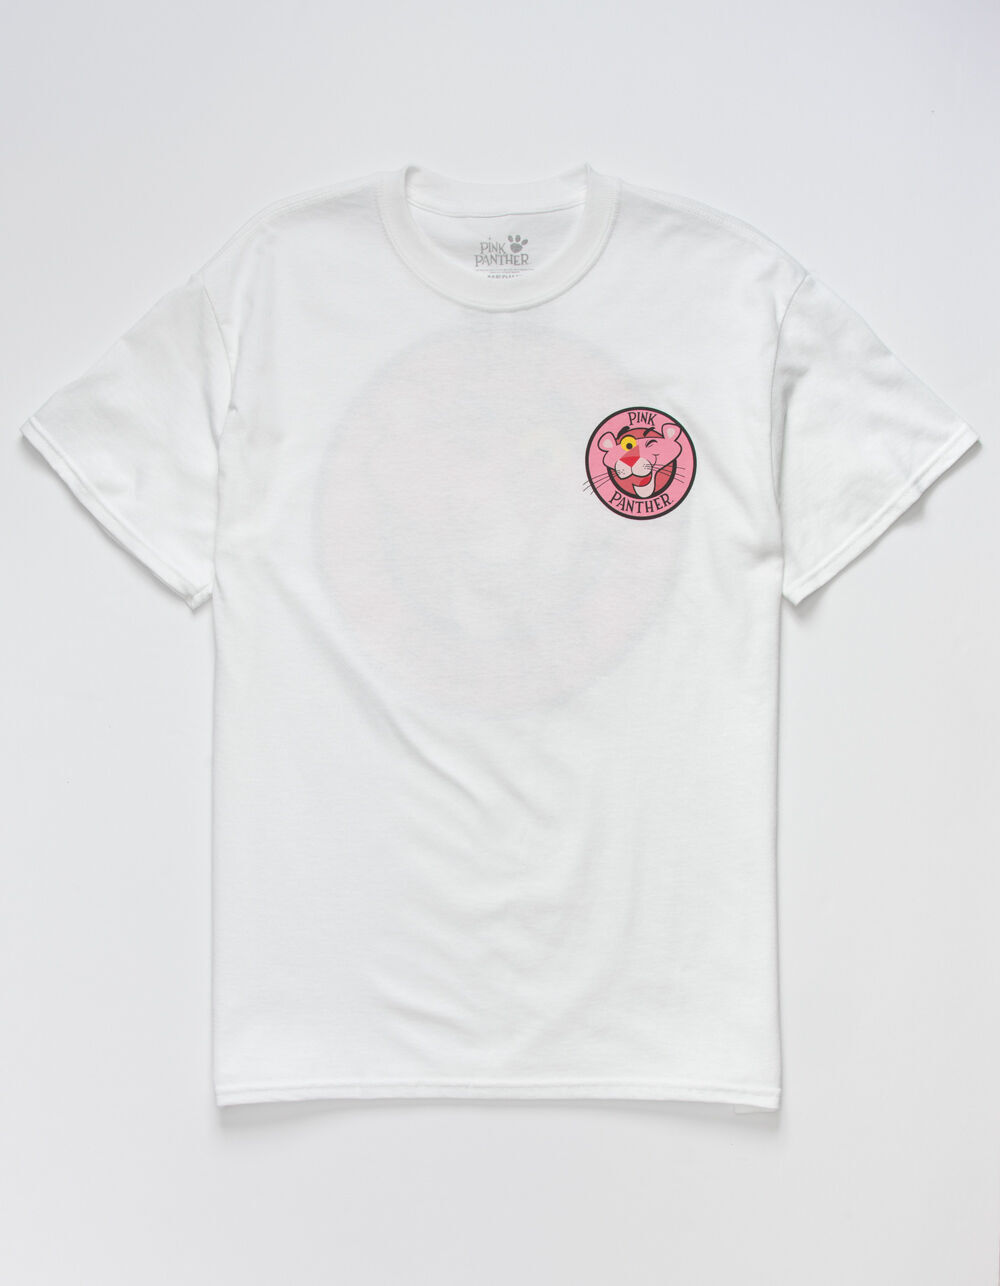 NEON RIOT Pink Panther Wink Mens White T-Shirt - WHITE | Tillys